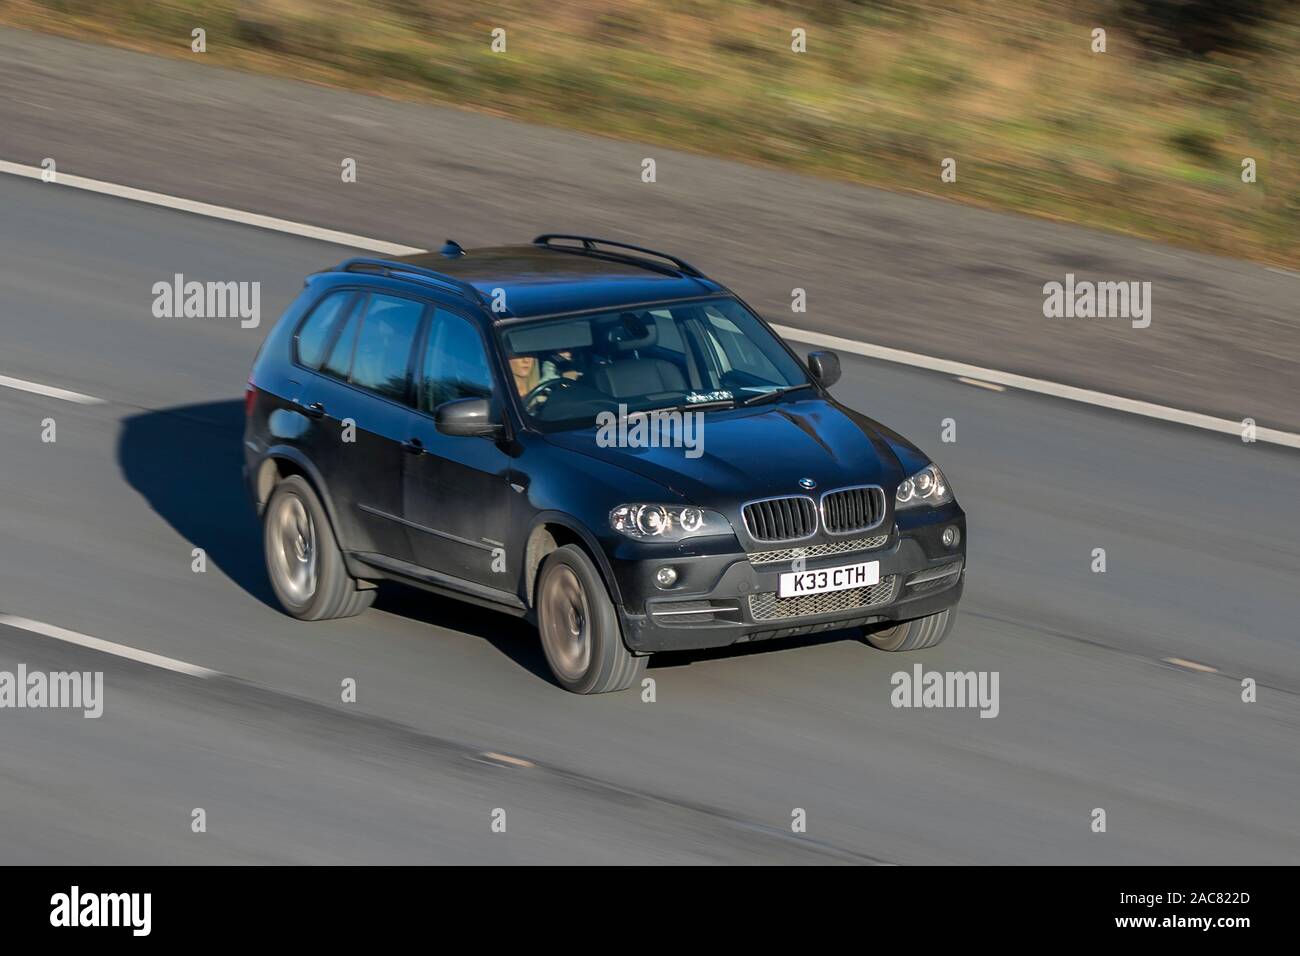 https://c8.alamy.com/comp/2AC822D/2009-black-bmw-x5-xdrive-30d-se-5s-a-traveling-at-speed-on-the-m61-motorway-slow-camera-shutter-speed-vehicle-movement-2AC822D.jpg